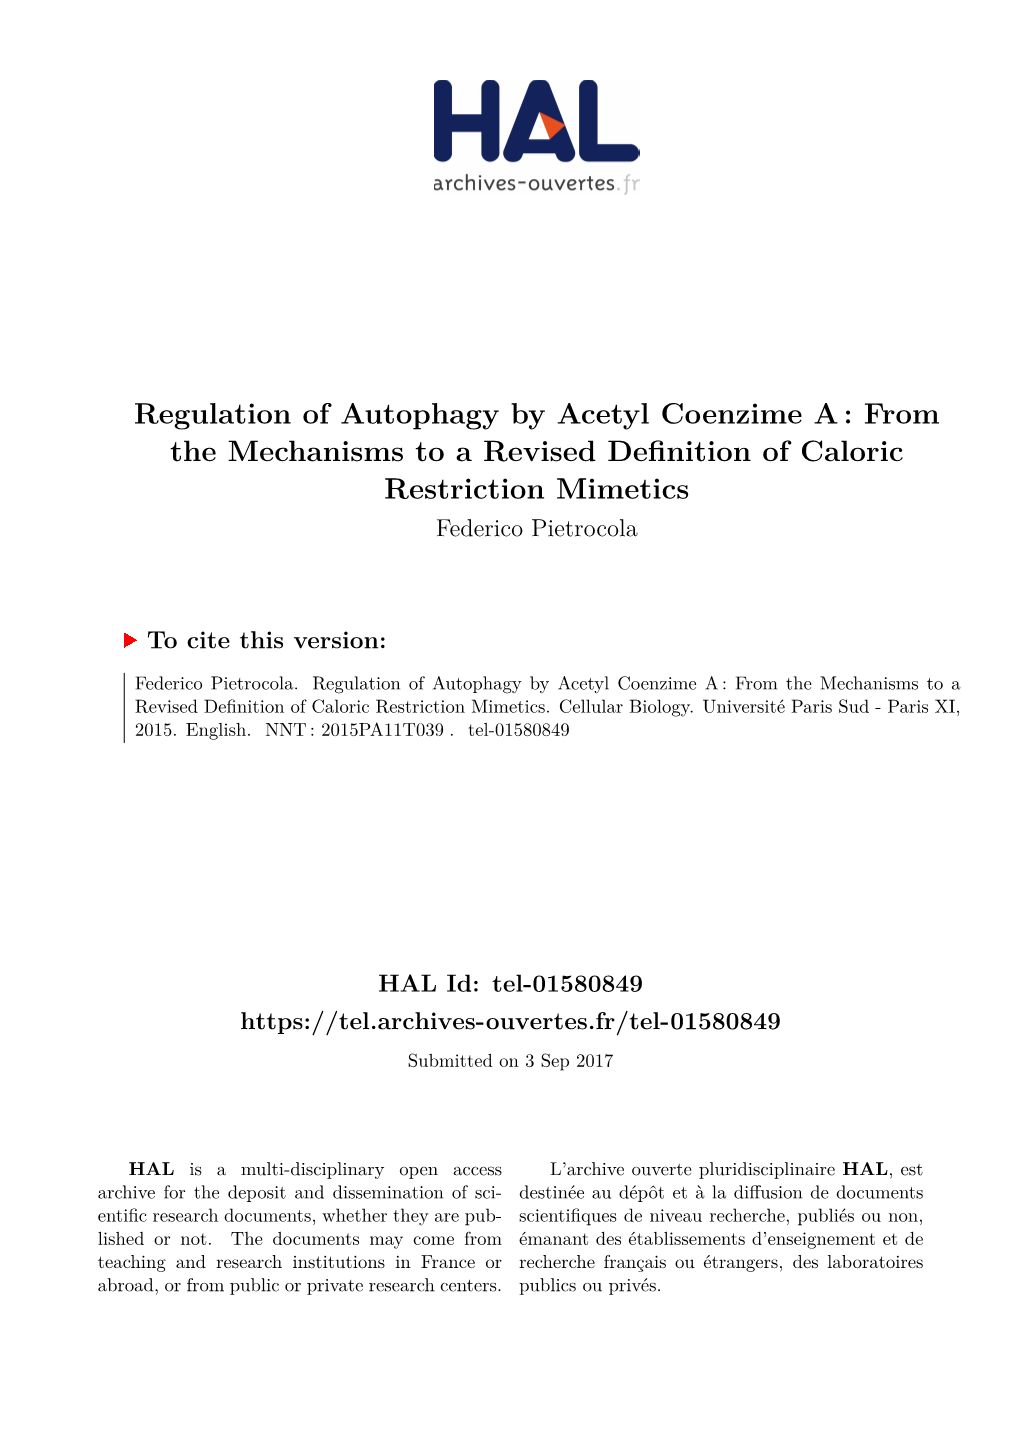 Regulation of Autophagy by Acetyl Coenzime a : from the Mechanisms to a Revised Definition of Caloric Restriction Mimetics Federico Pietrocola